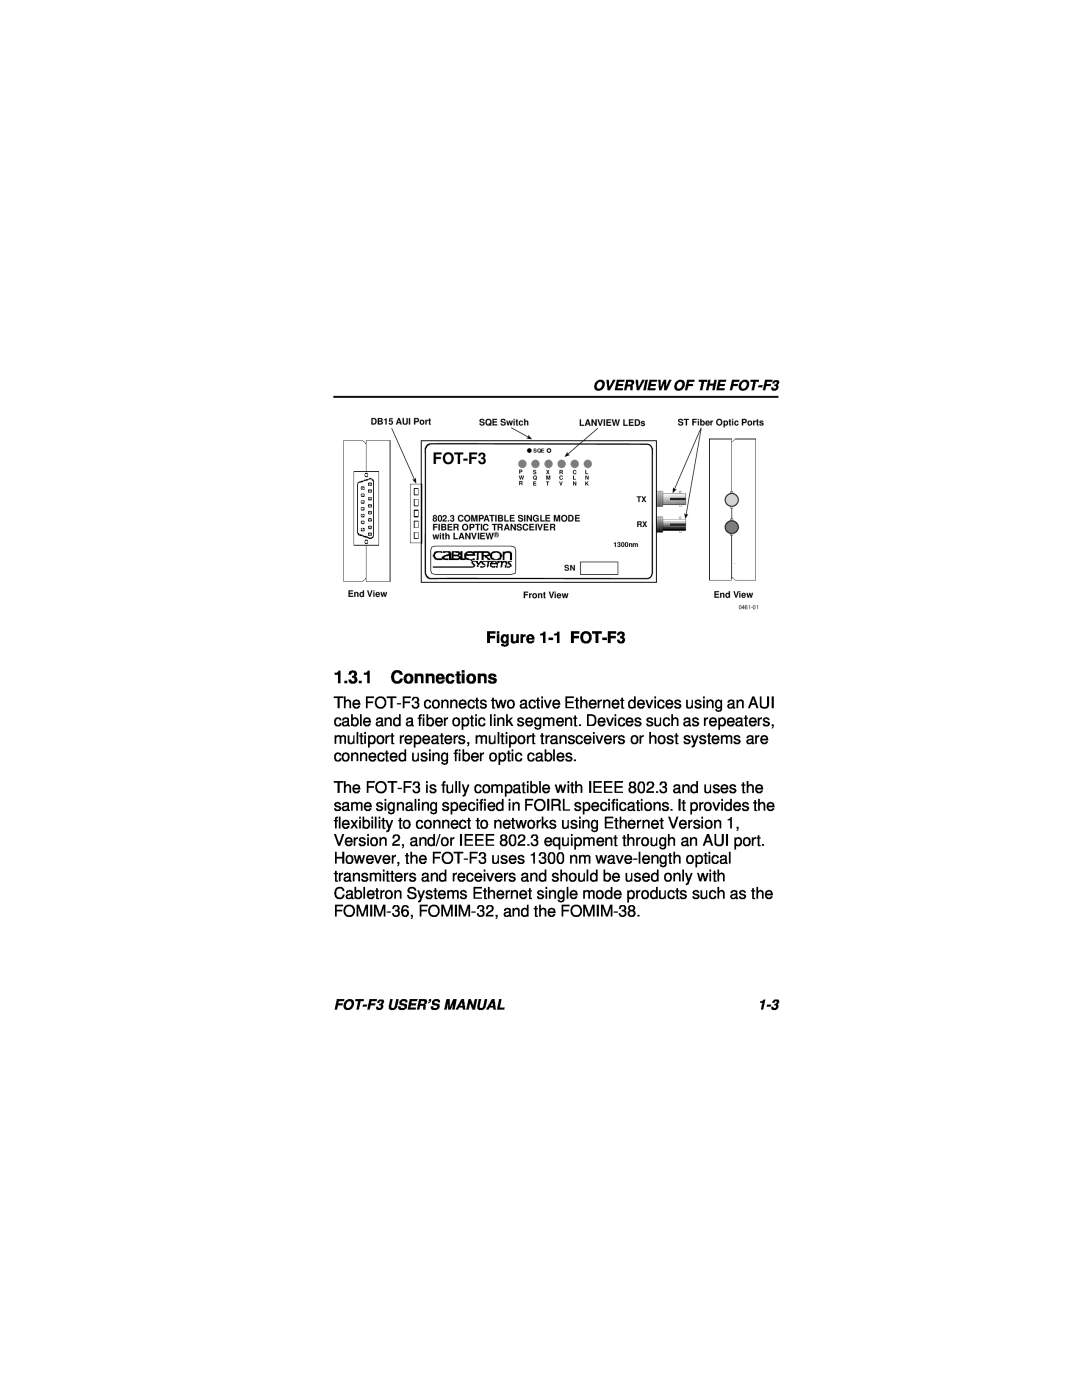 Cabletron Systems user manual Connections, 1 FOT-F3 